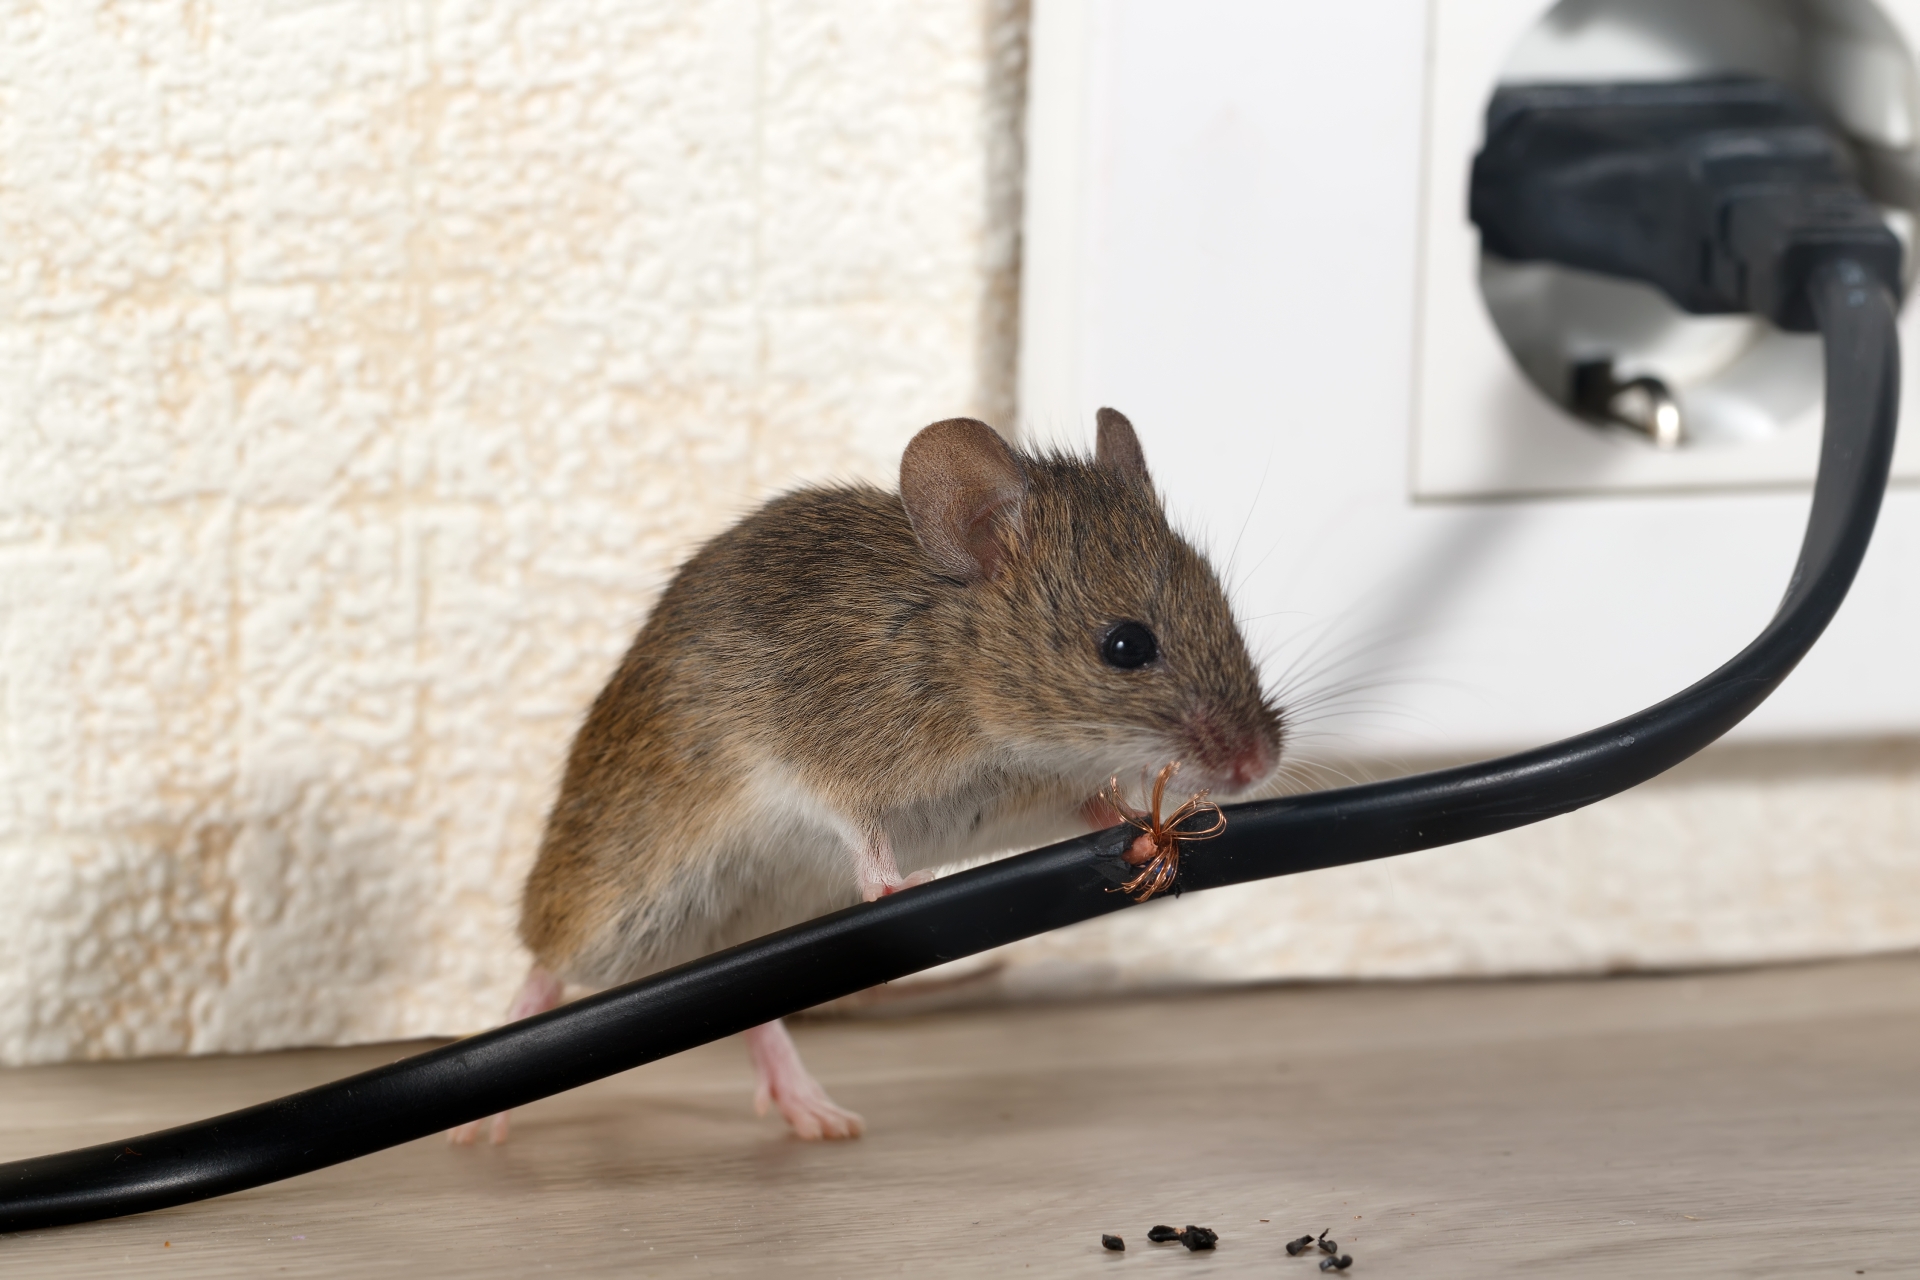 Mice Infestation, Pest Control in Leatherhead, Oxshott, Fetcham, KT22. Call Now 020 8166 9746